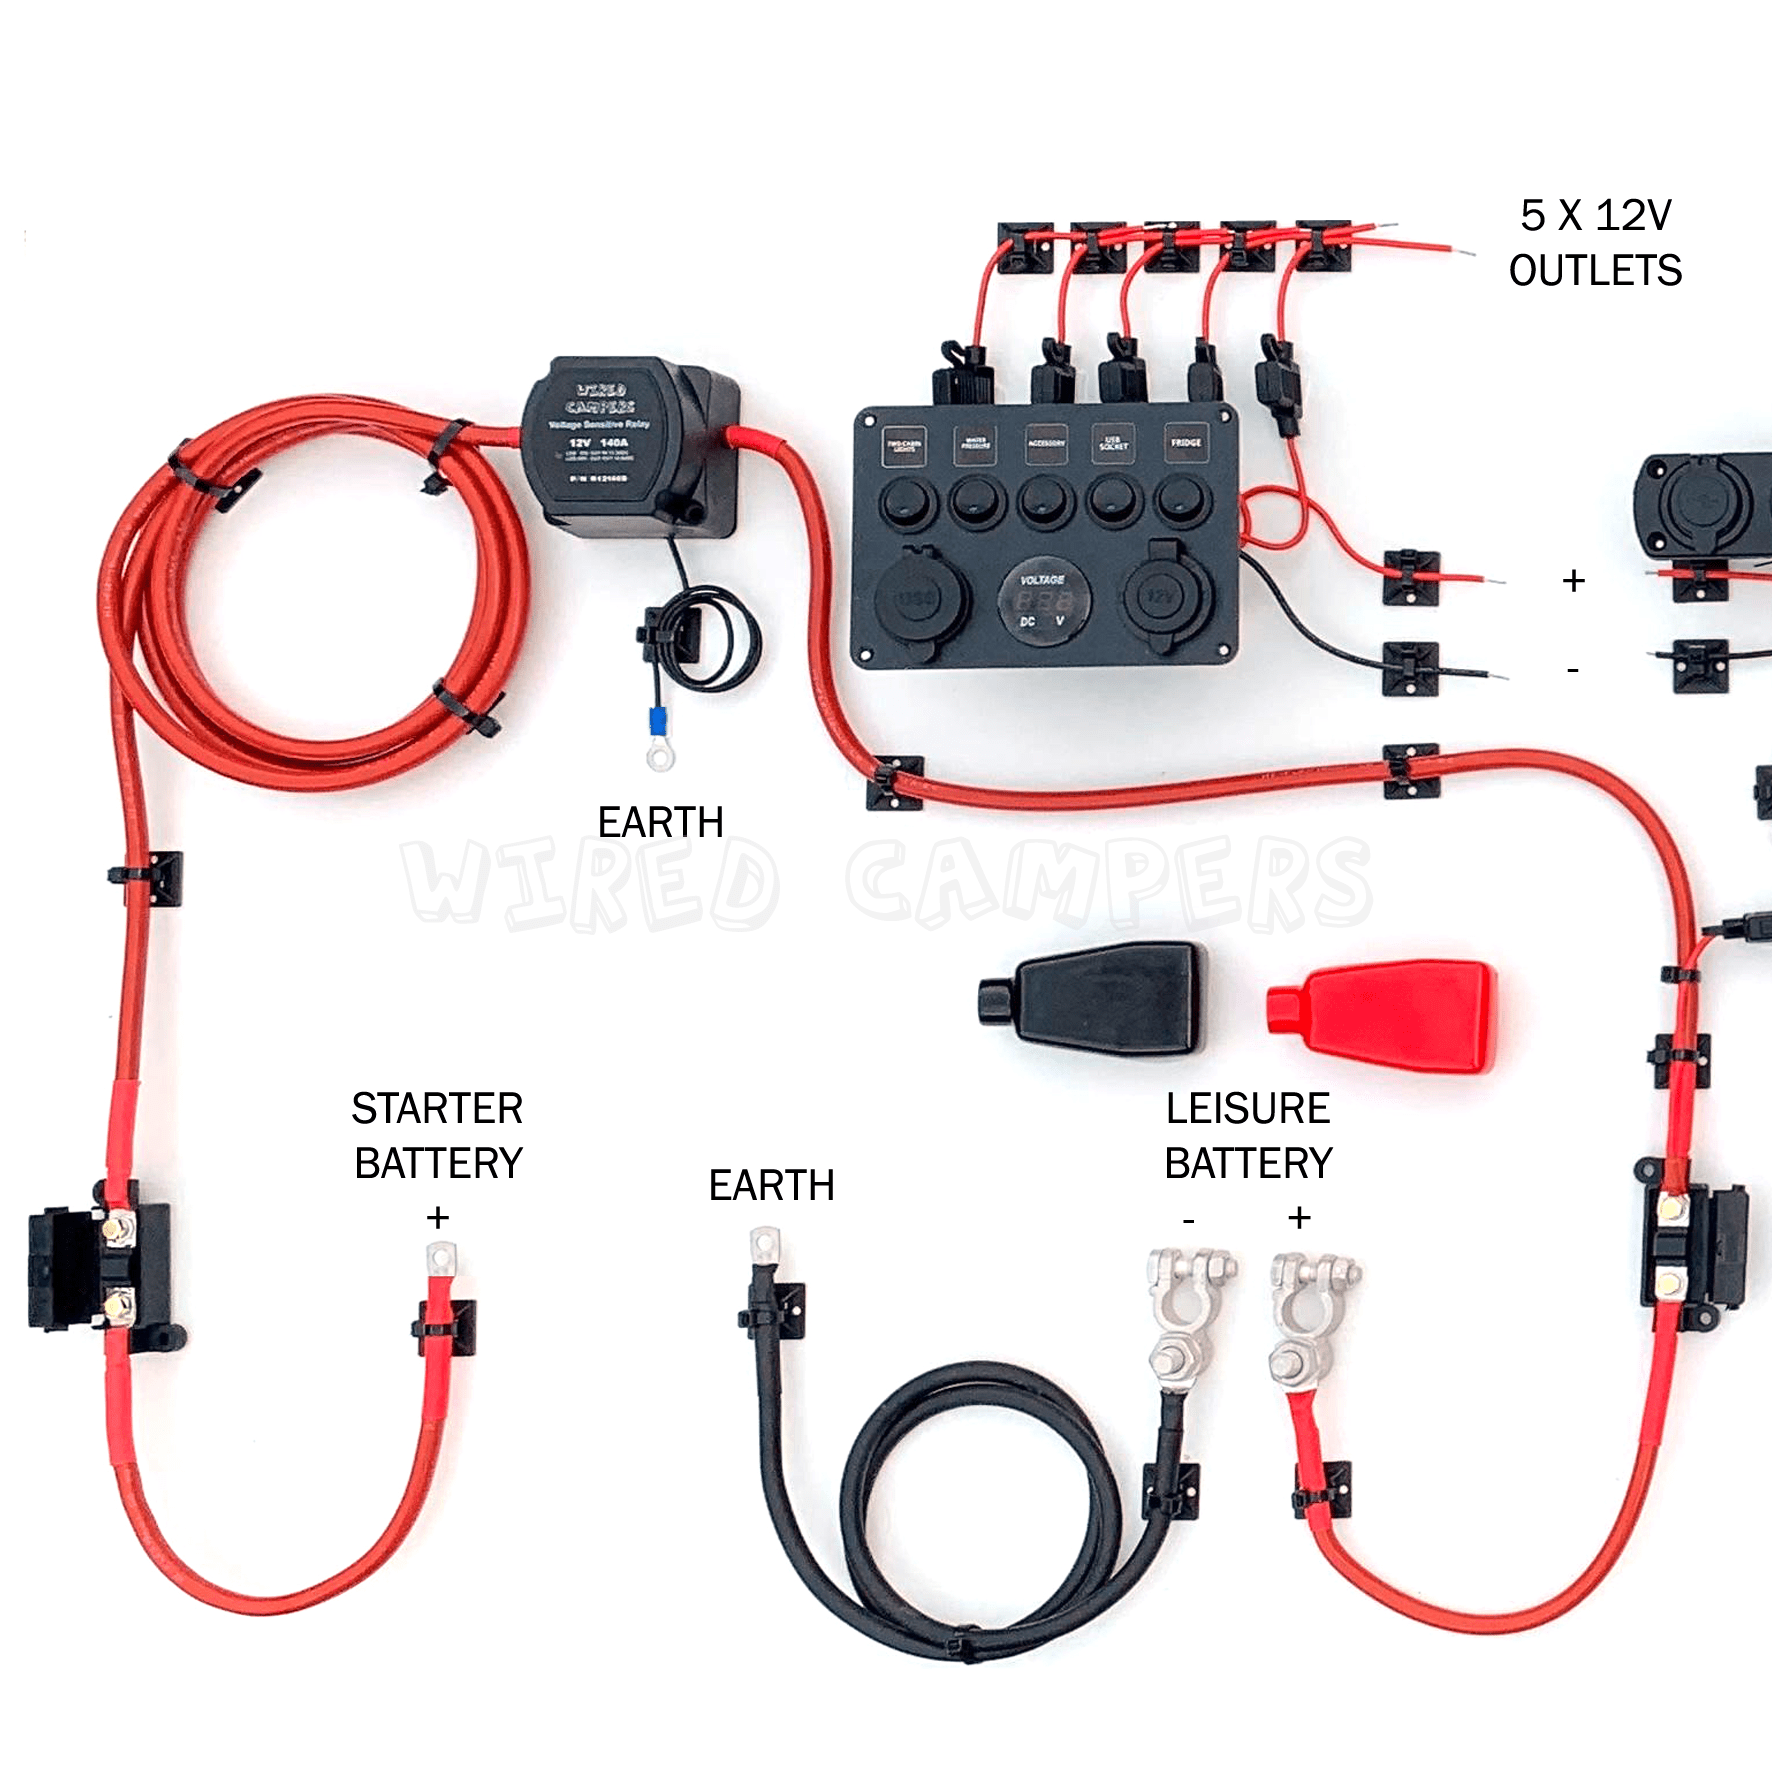 Wired Campers Complete Camper Van Electrical System - 12V Split Charge & 240V Mains With 140W 10A Solar Kit